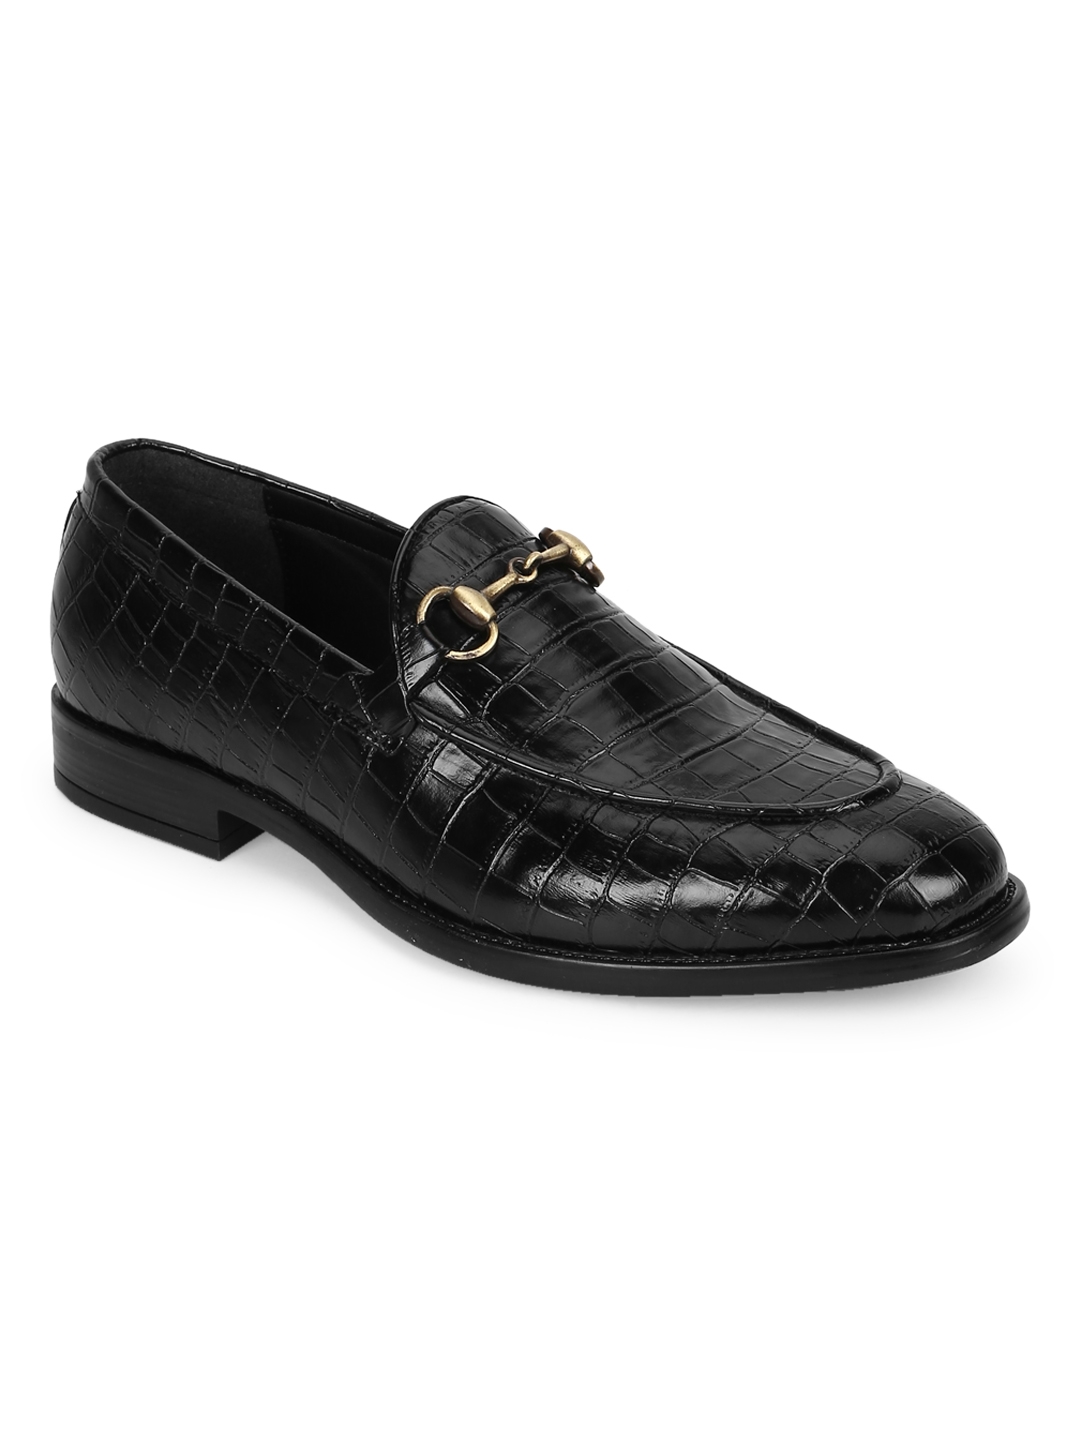 Truffle Collection | Black Croc PU Men's Low Heel Chained Loafers